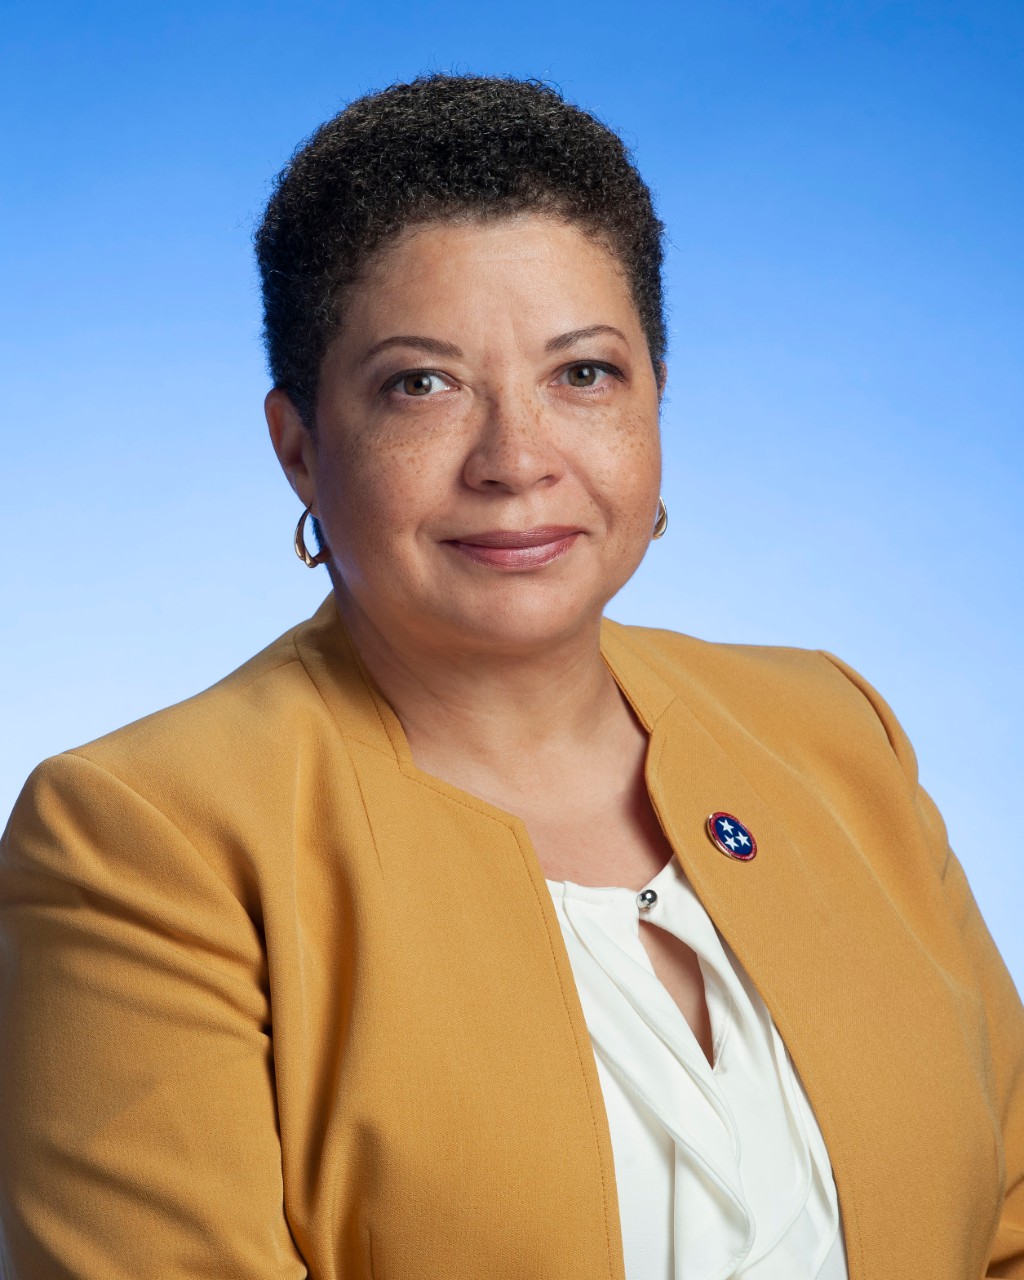 Cathlyn’s headshot. She is an African American woman in a dark yellow blazer with a state of Tennessee pin on her lapel, small hoop earrings, short hair and a kind smile.